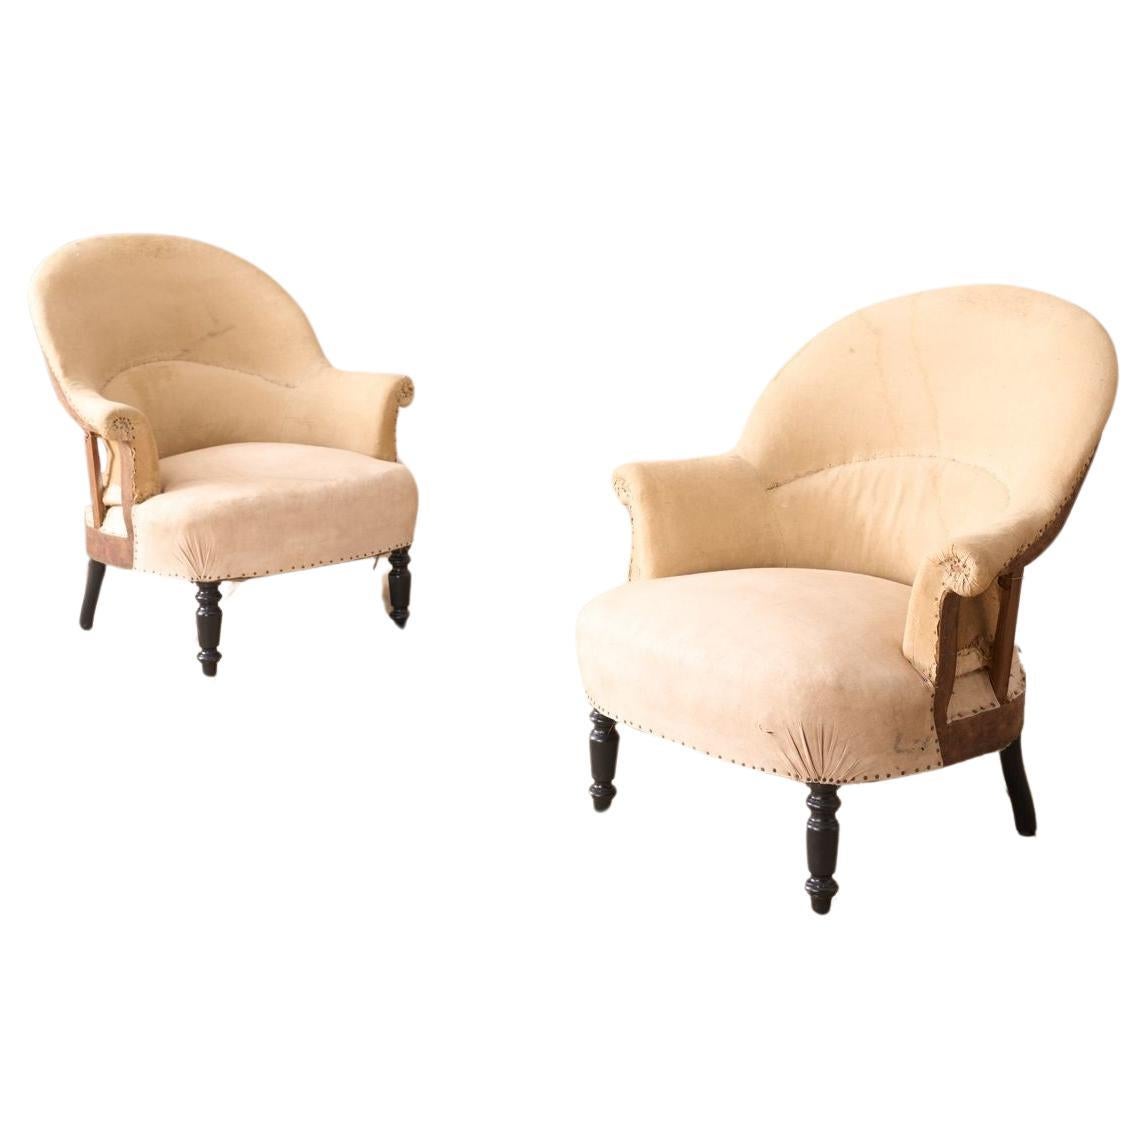 Pair of Napoleon III tub chairs with turned legs